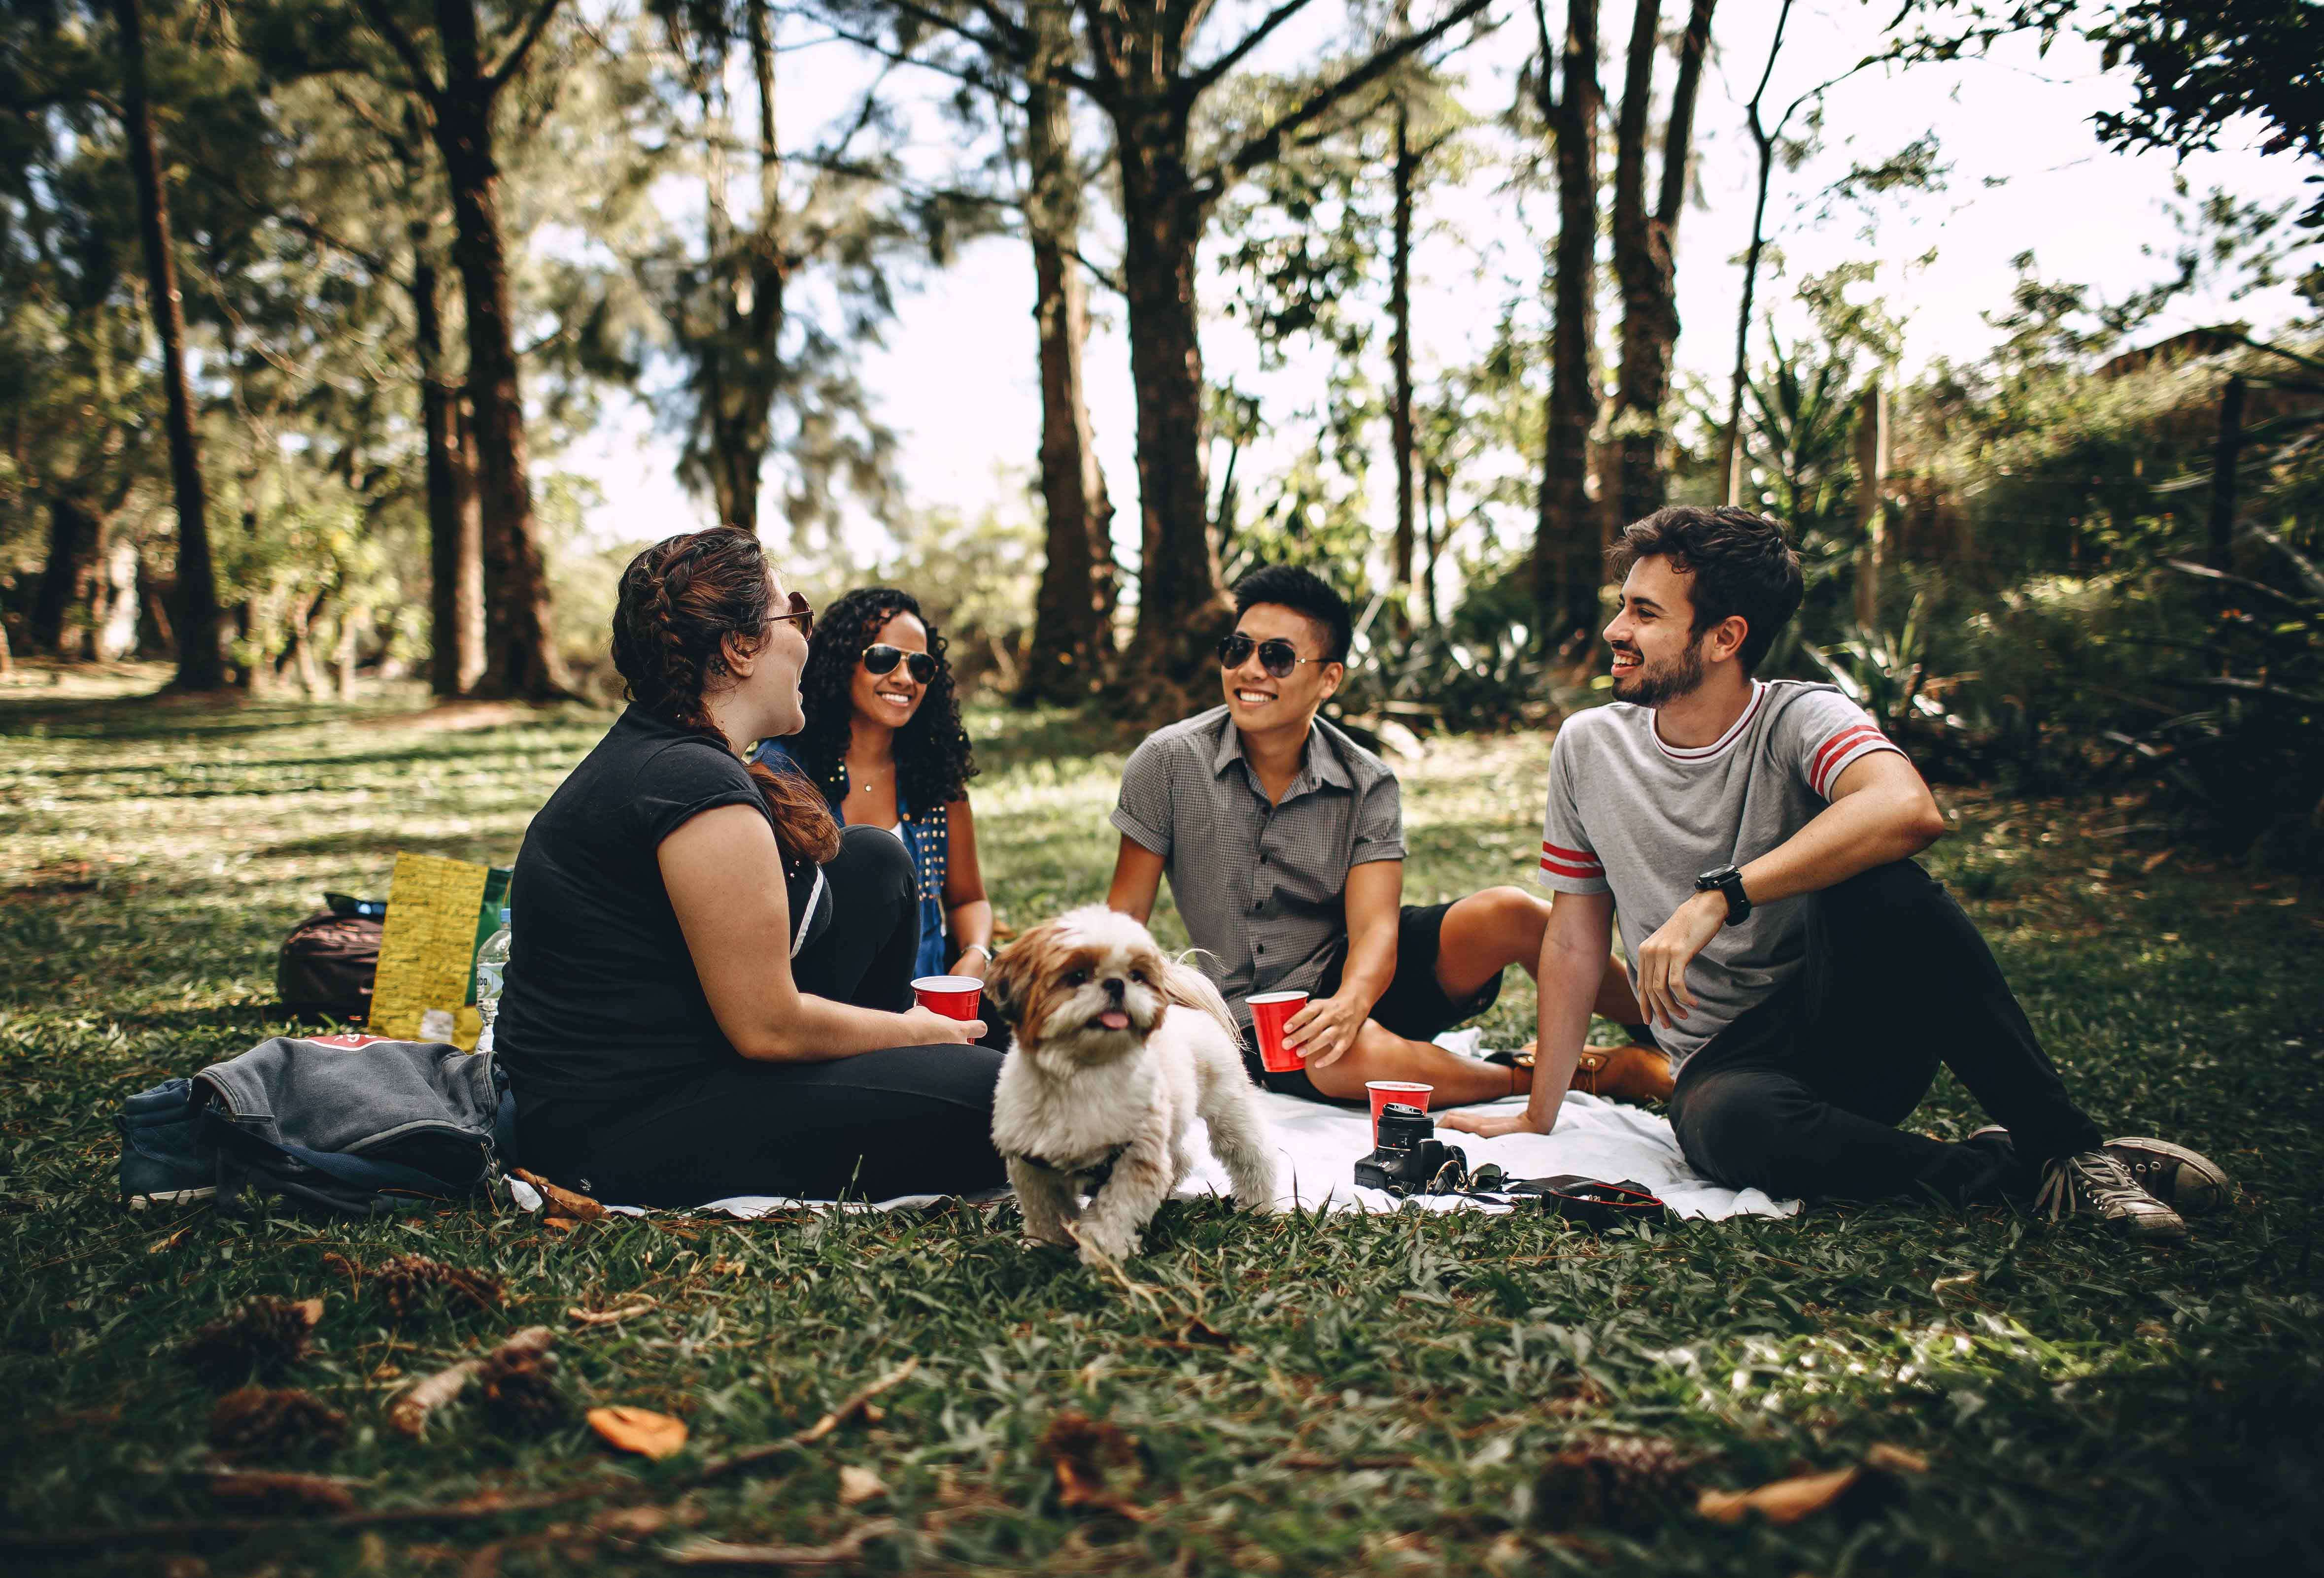 Four people sitting on a blanket on the grass, enjoying a picnic and a cute dog